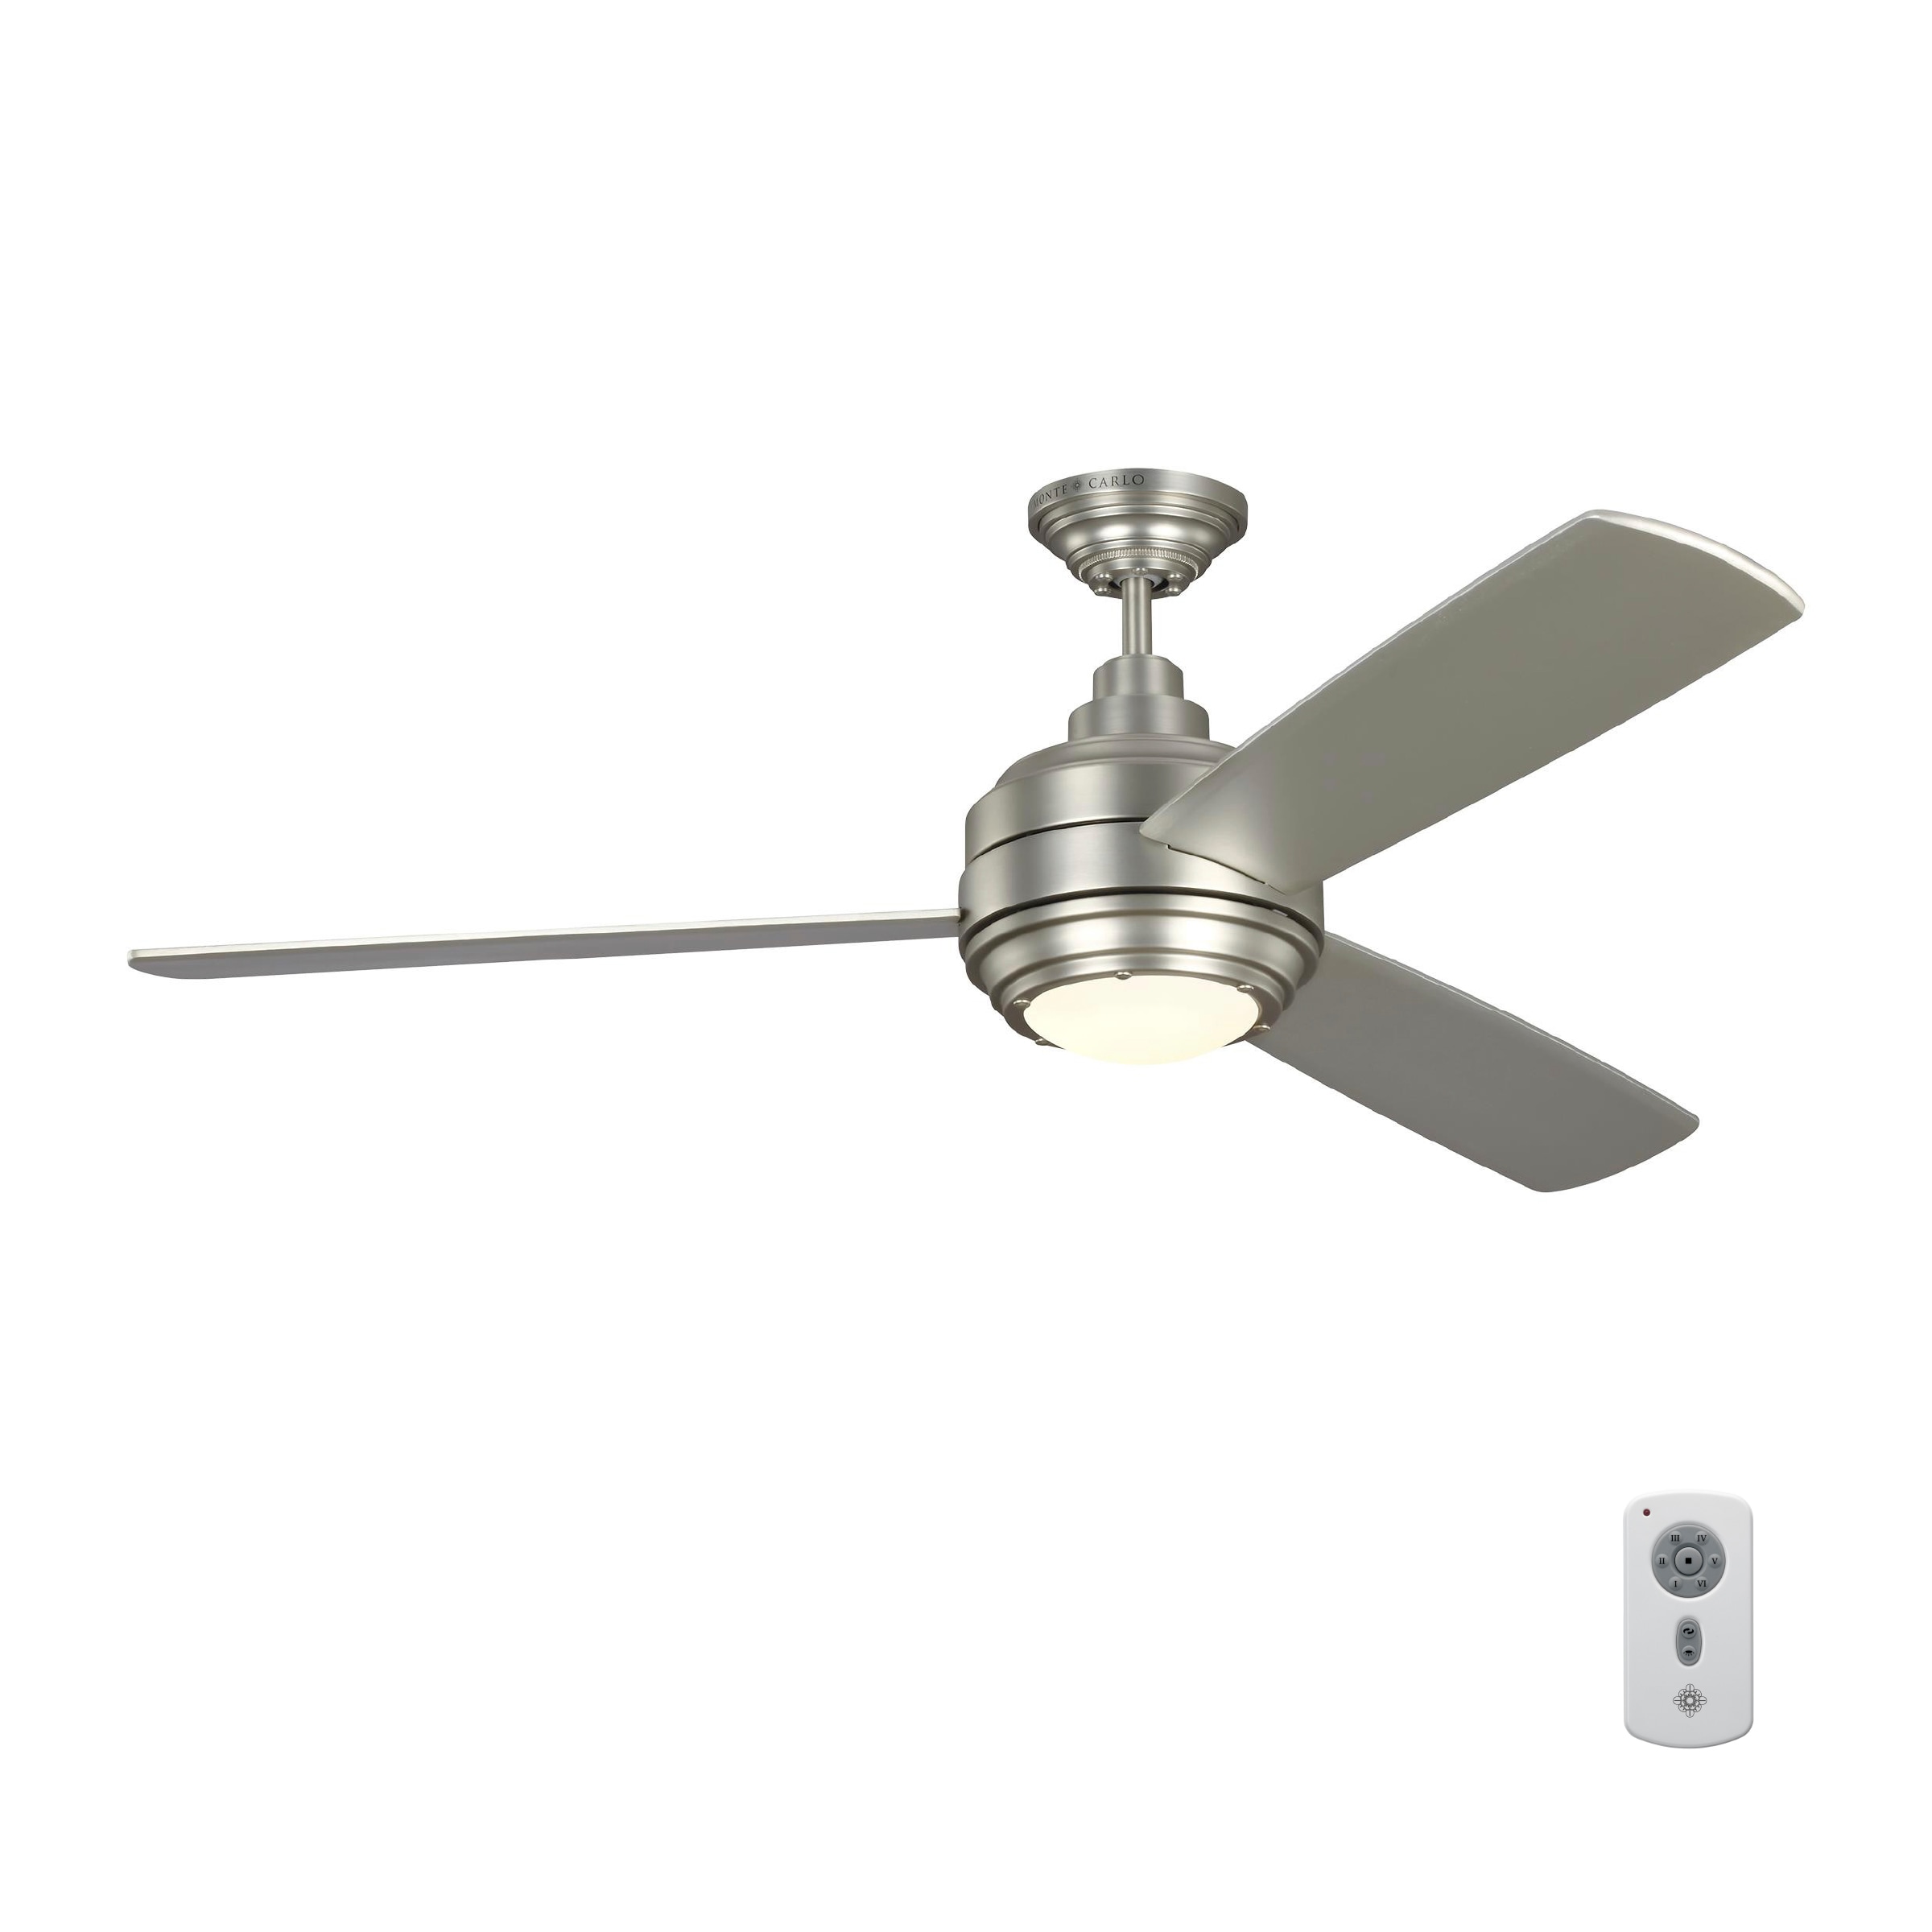 52" 56'' Indoor Ceiling Fan with LED Light Remote Control Nickel Bronze finish 